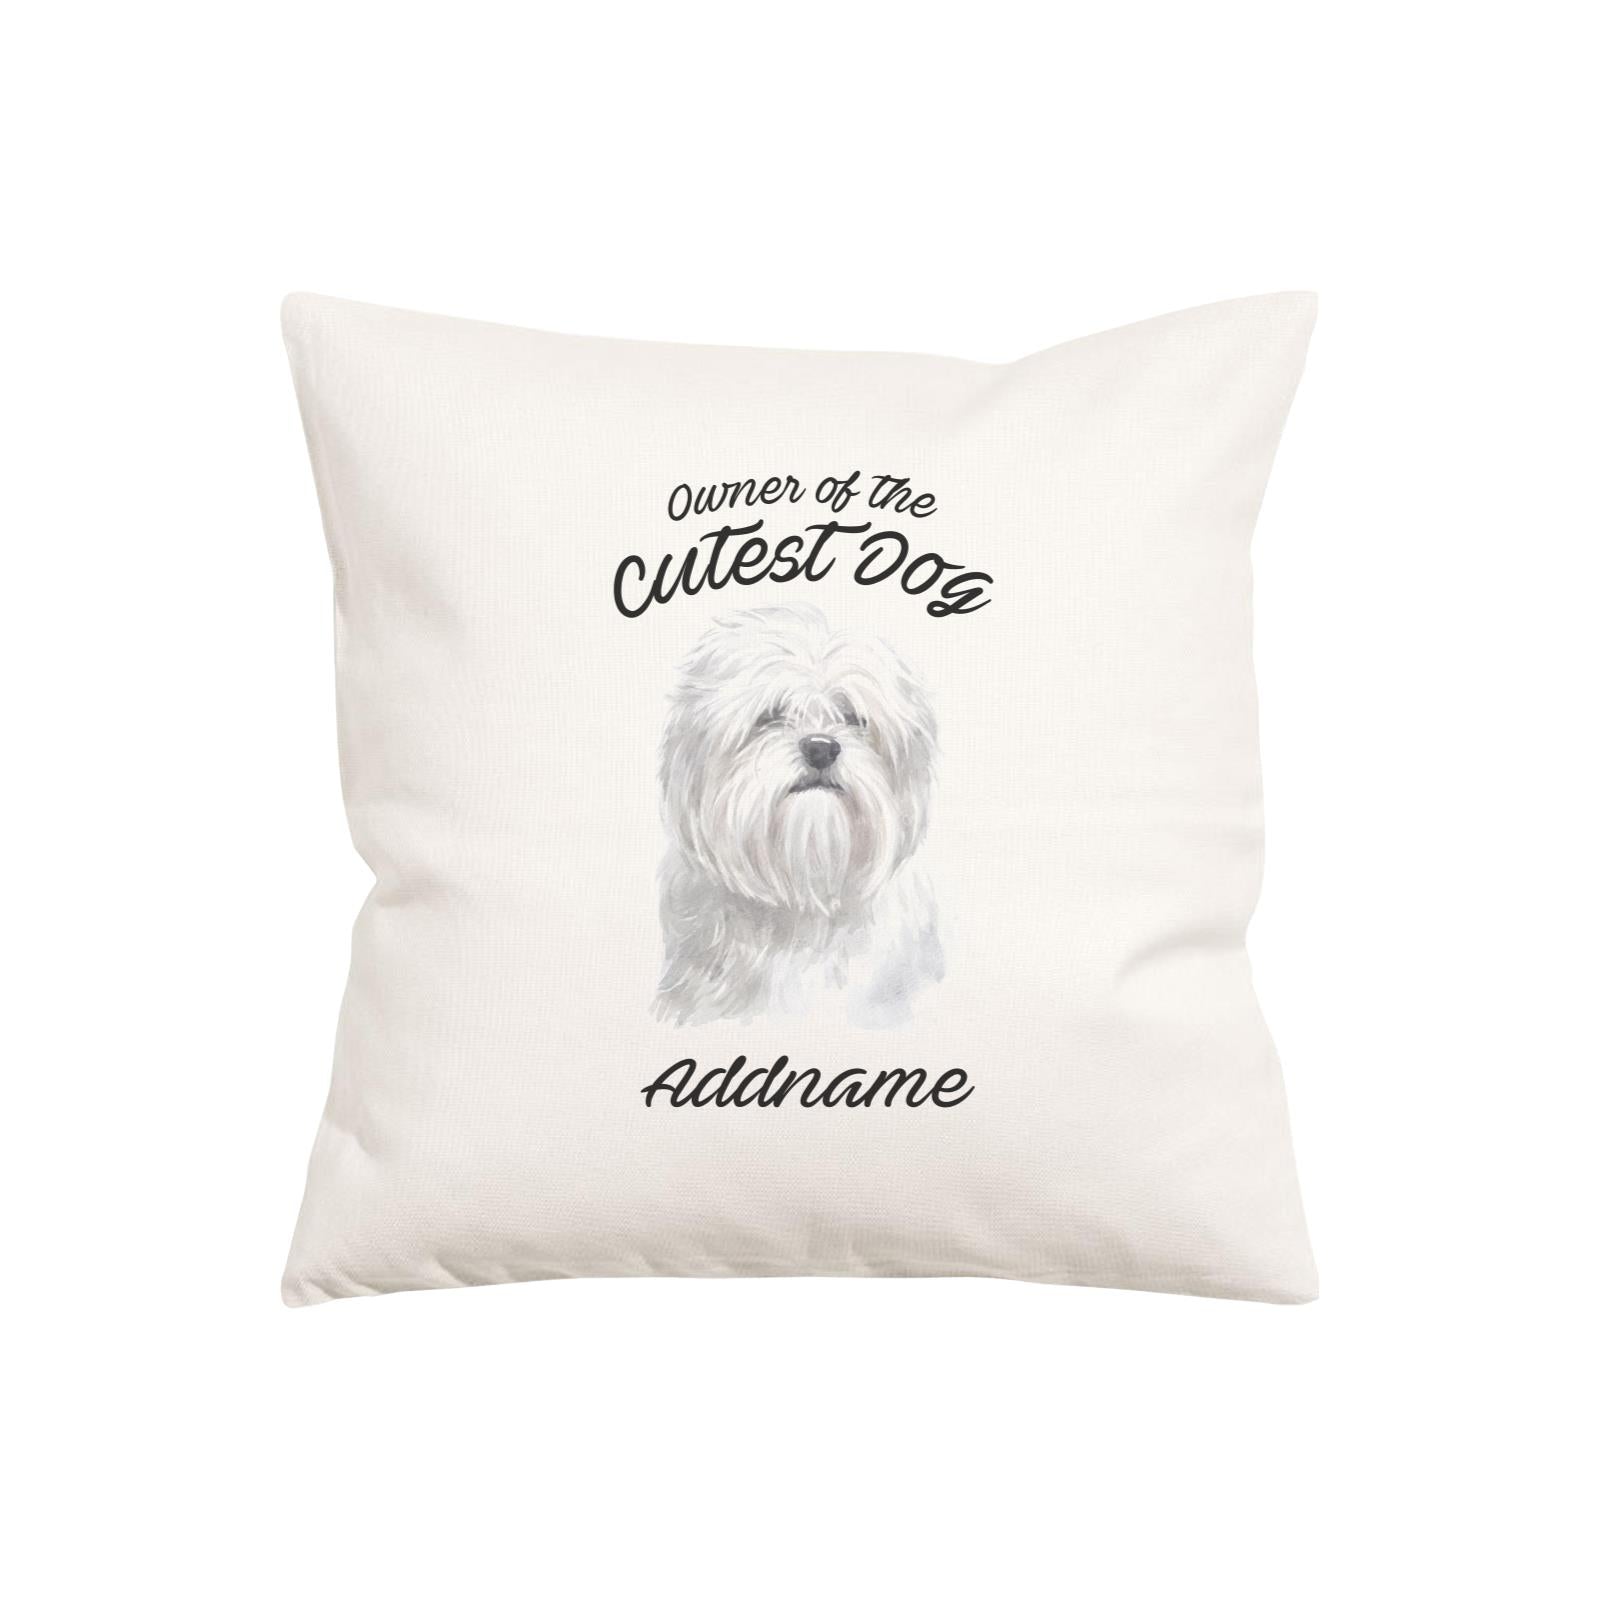 Watercolor Dog Owner Of The Cutest Dog Lhasa Apso Addname Pillow Cushion